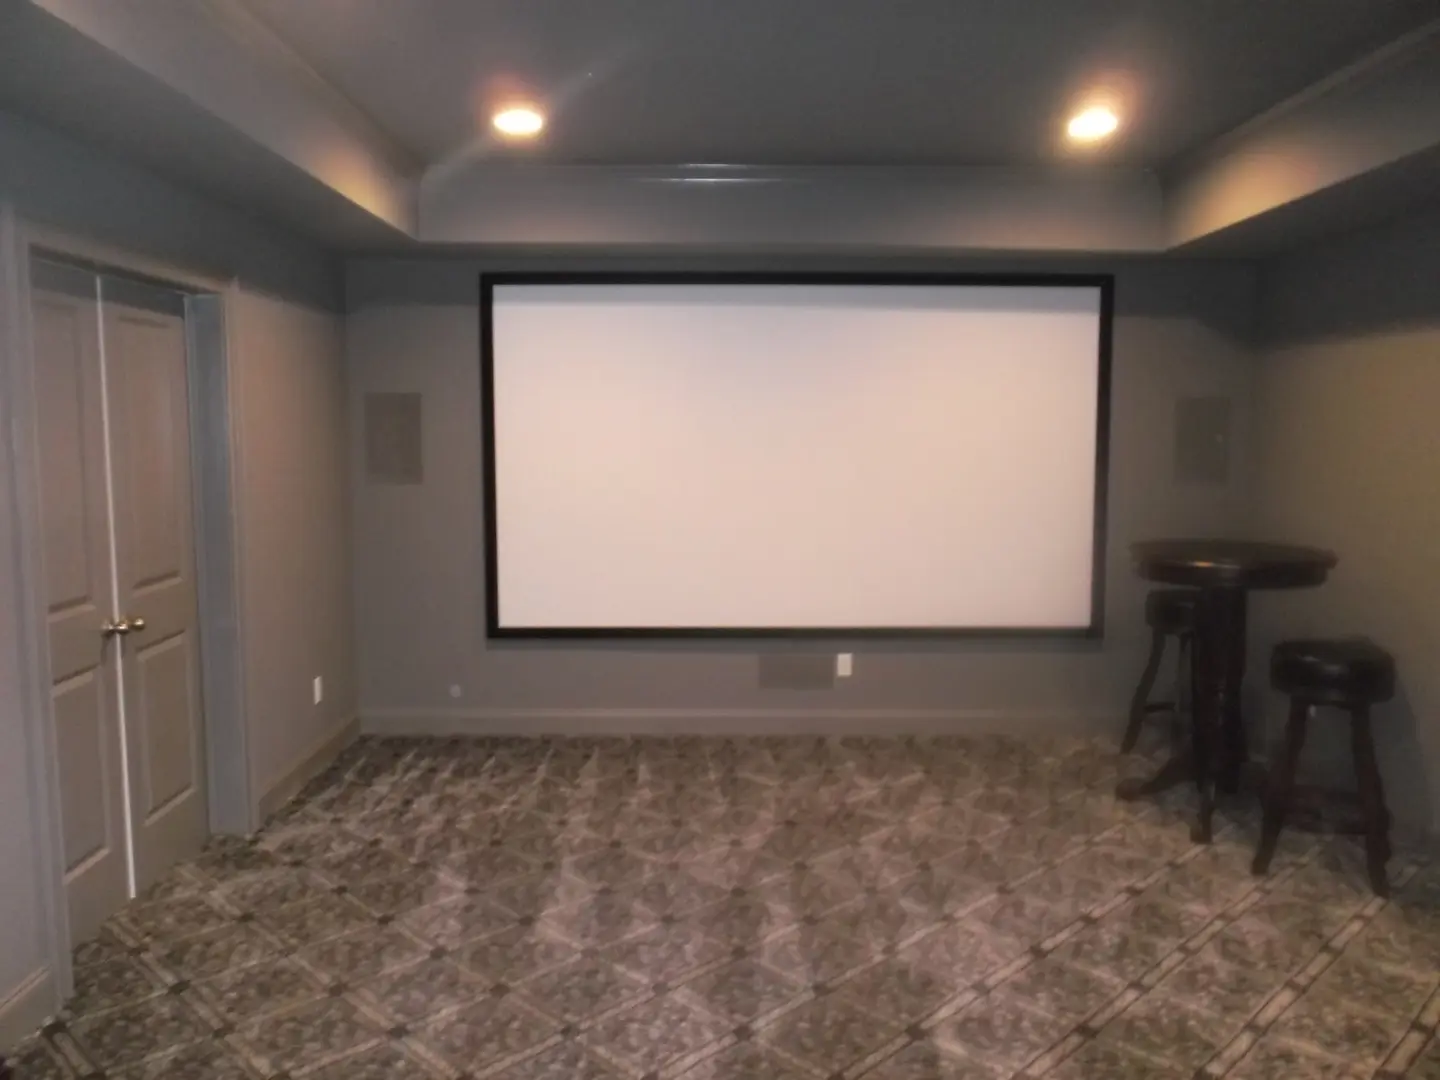 A large screen projector in the middle of a room.